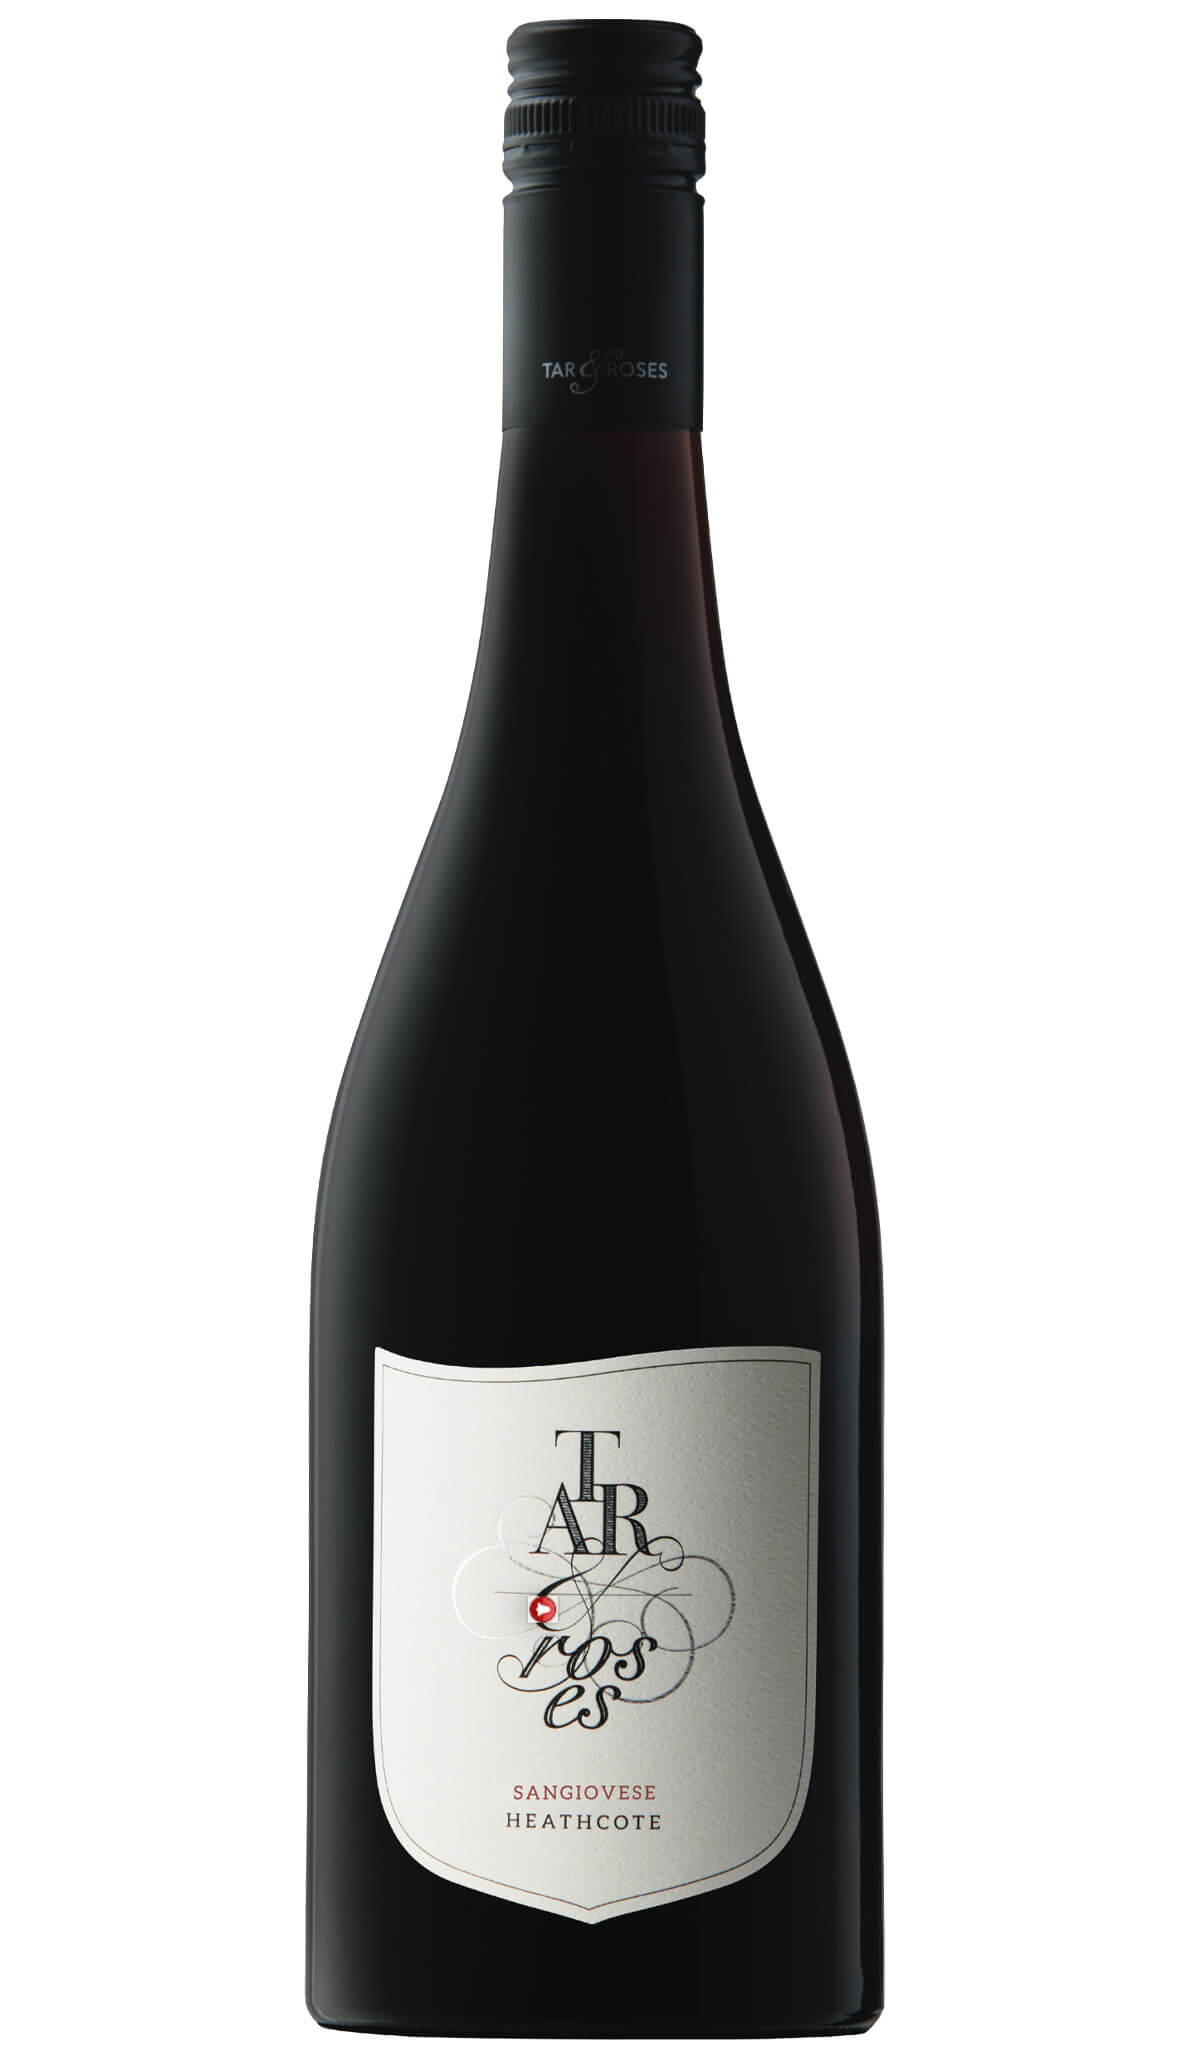 Find out more or buy Tar & Roses Heathcote Sangiovese 2022 online at Wine Sellers Direct - Australia’s independent liquor specialists.